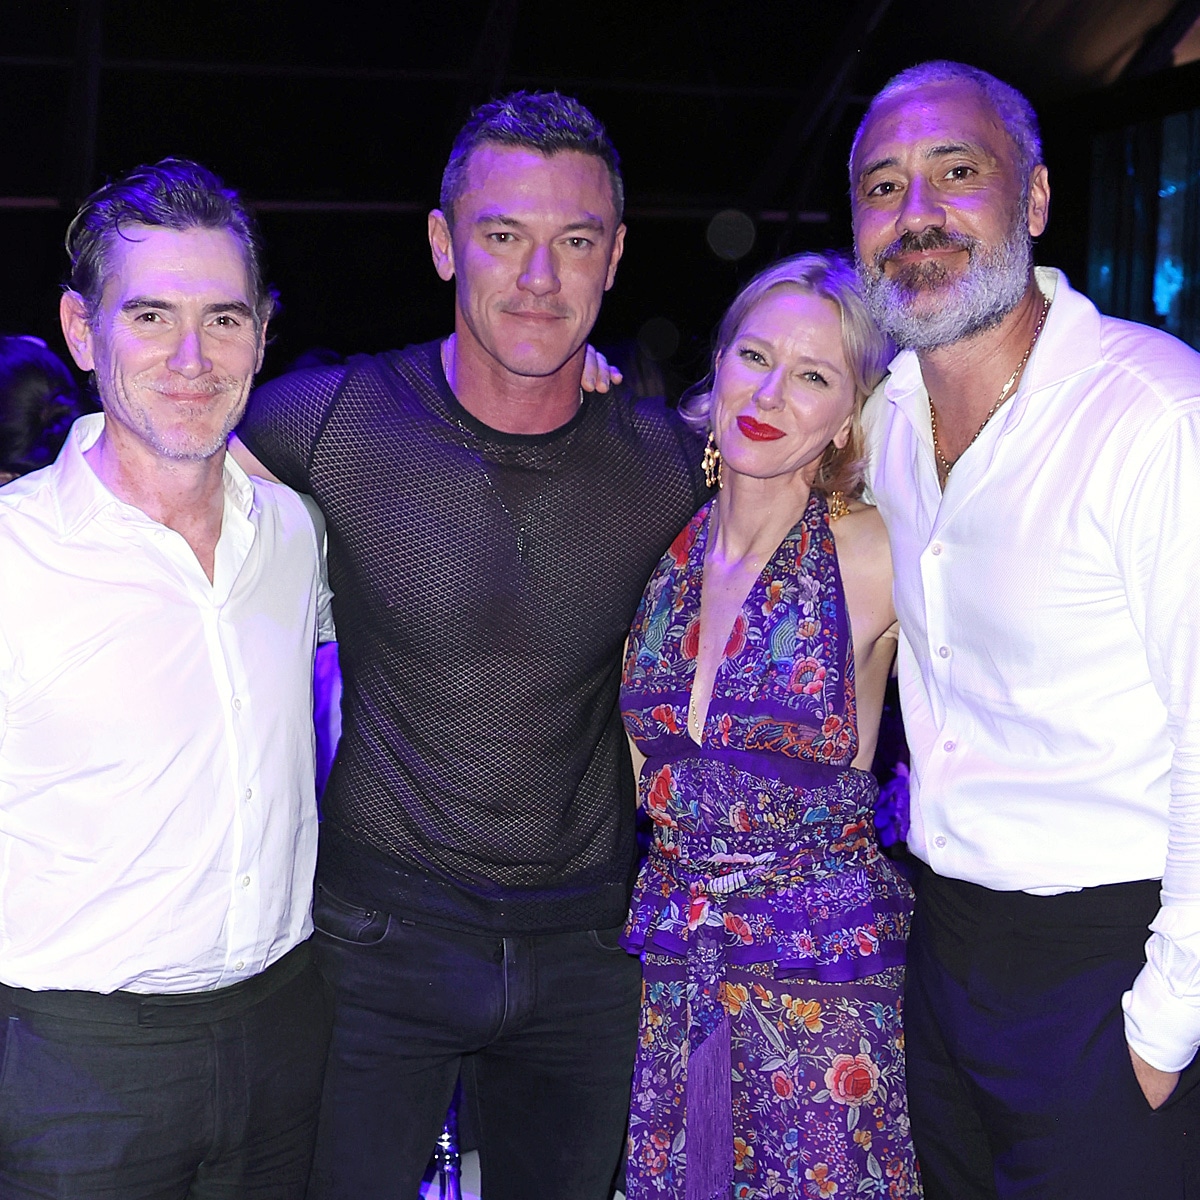 Leonardo DiCaprio, Drake and More Party in St. Barts for Charity Gala